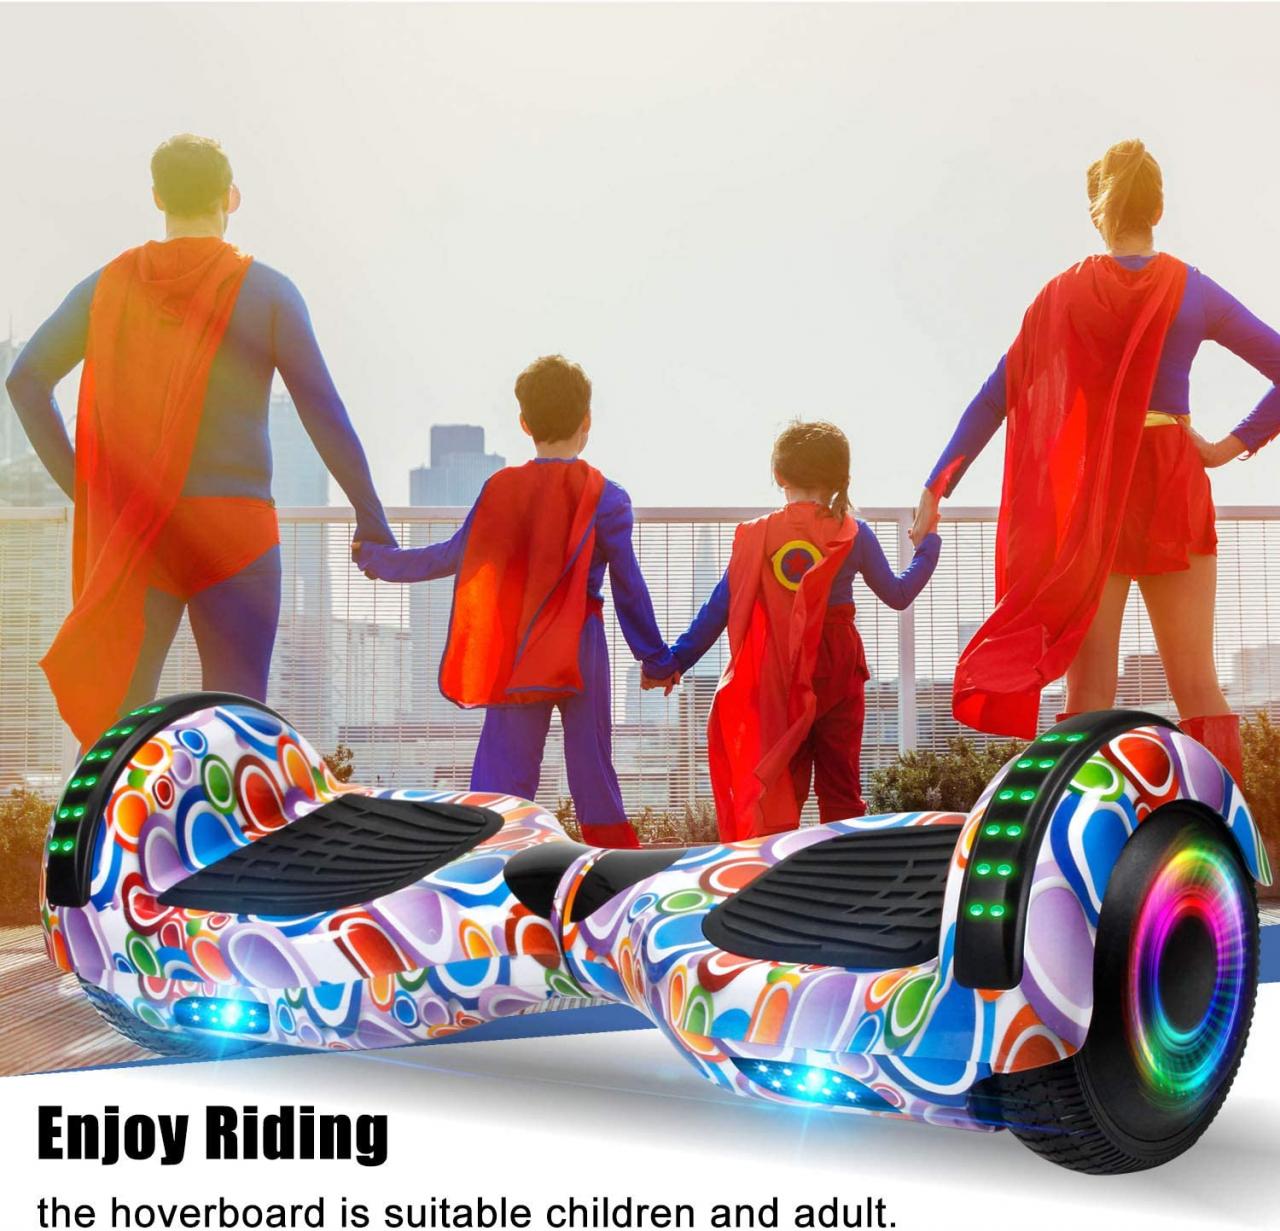 Buy FLYING-ANT Hoverboard 6.5” Two-Wheel Self Balancing Hoverboard with LED  Light Flash Lights Wheels for Kids Teenagers Online in Vietnam. B087C2DNR2